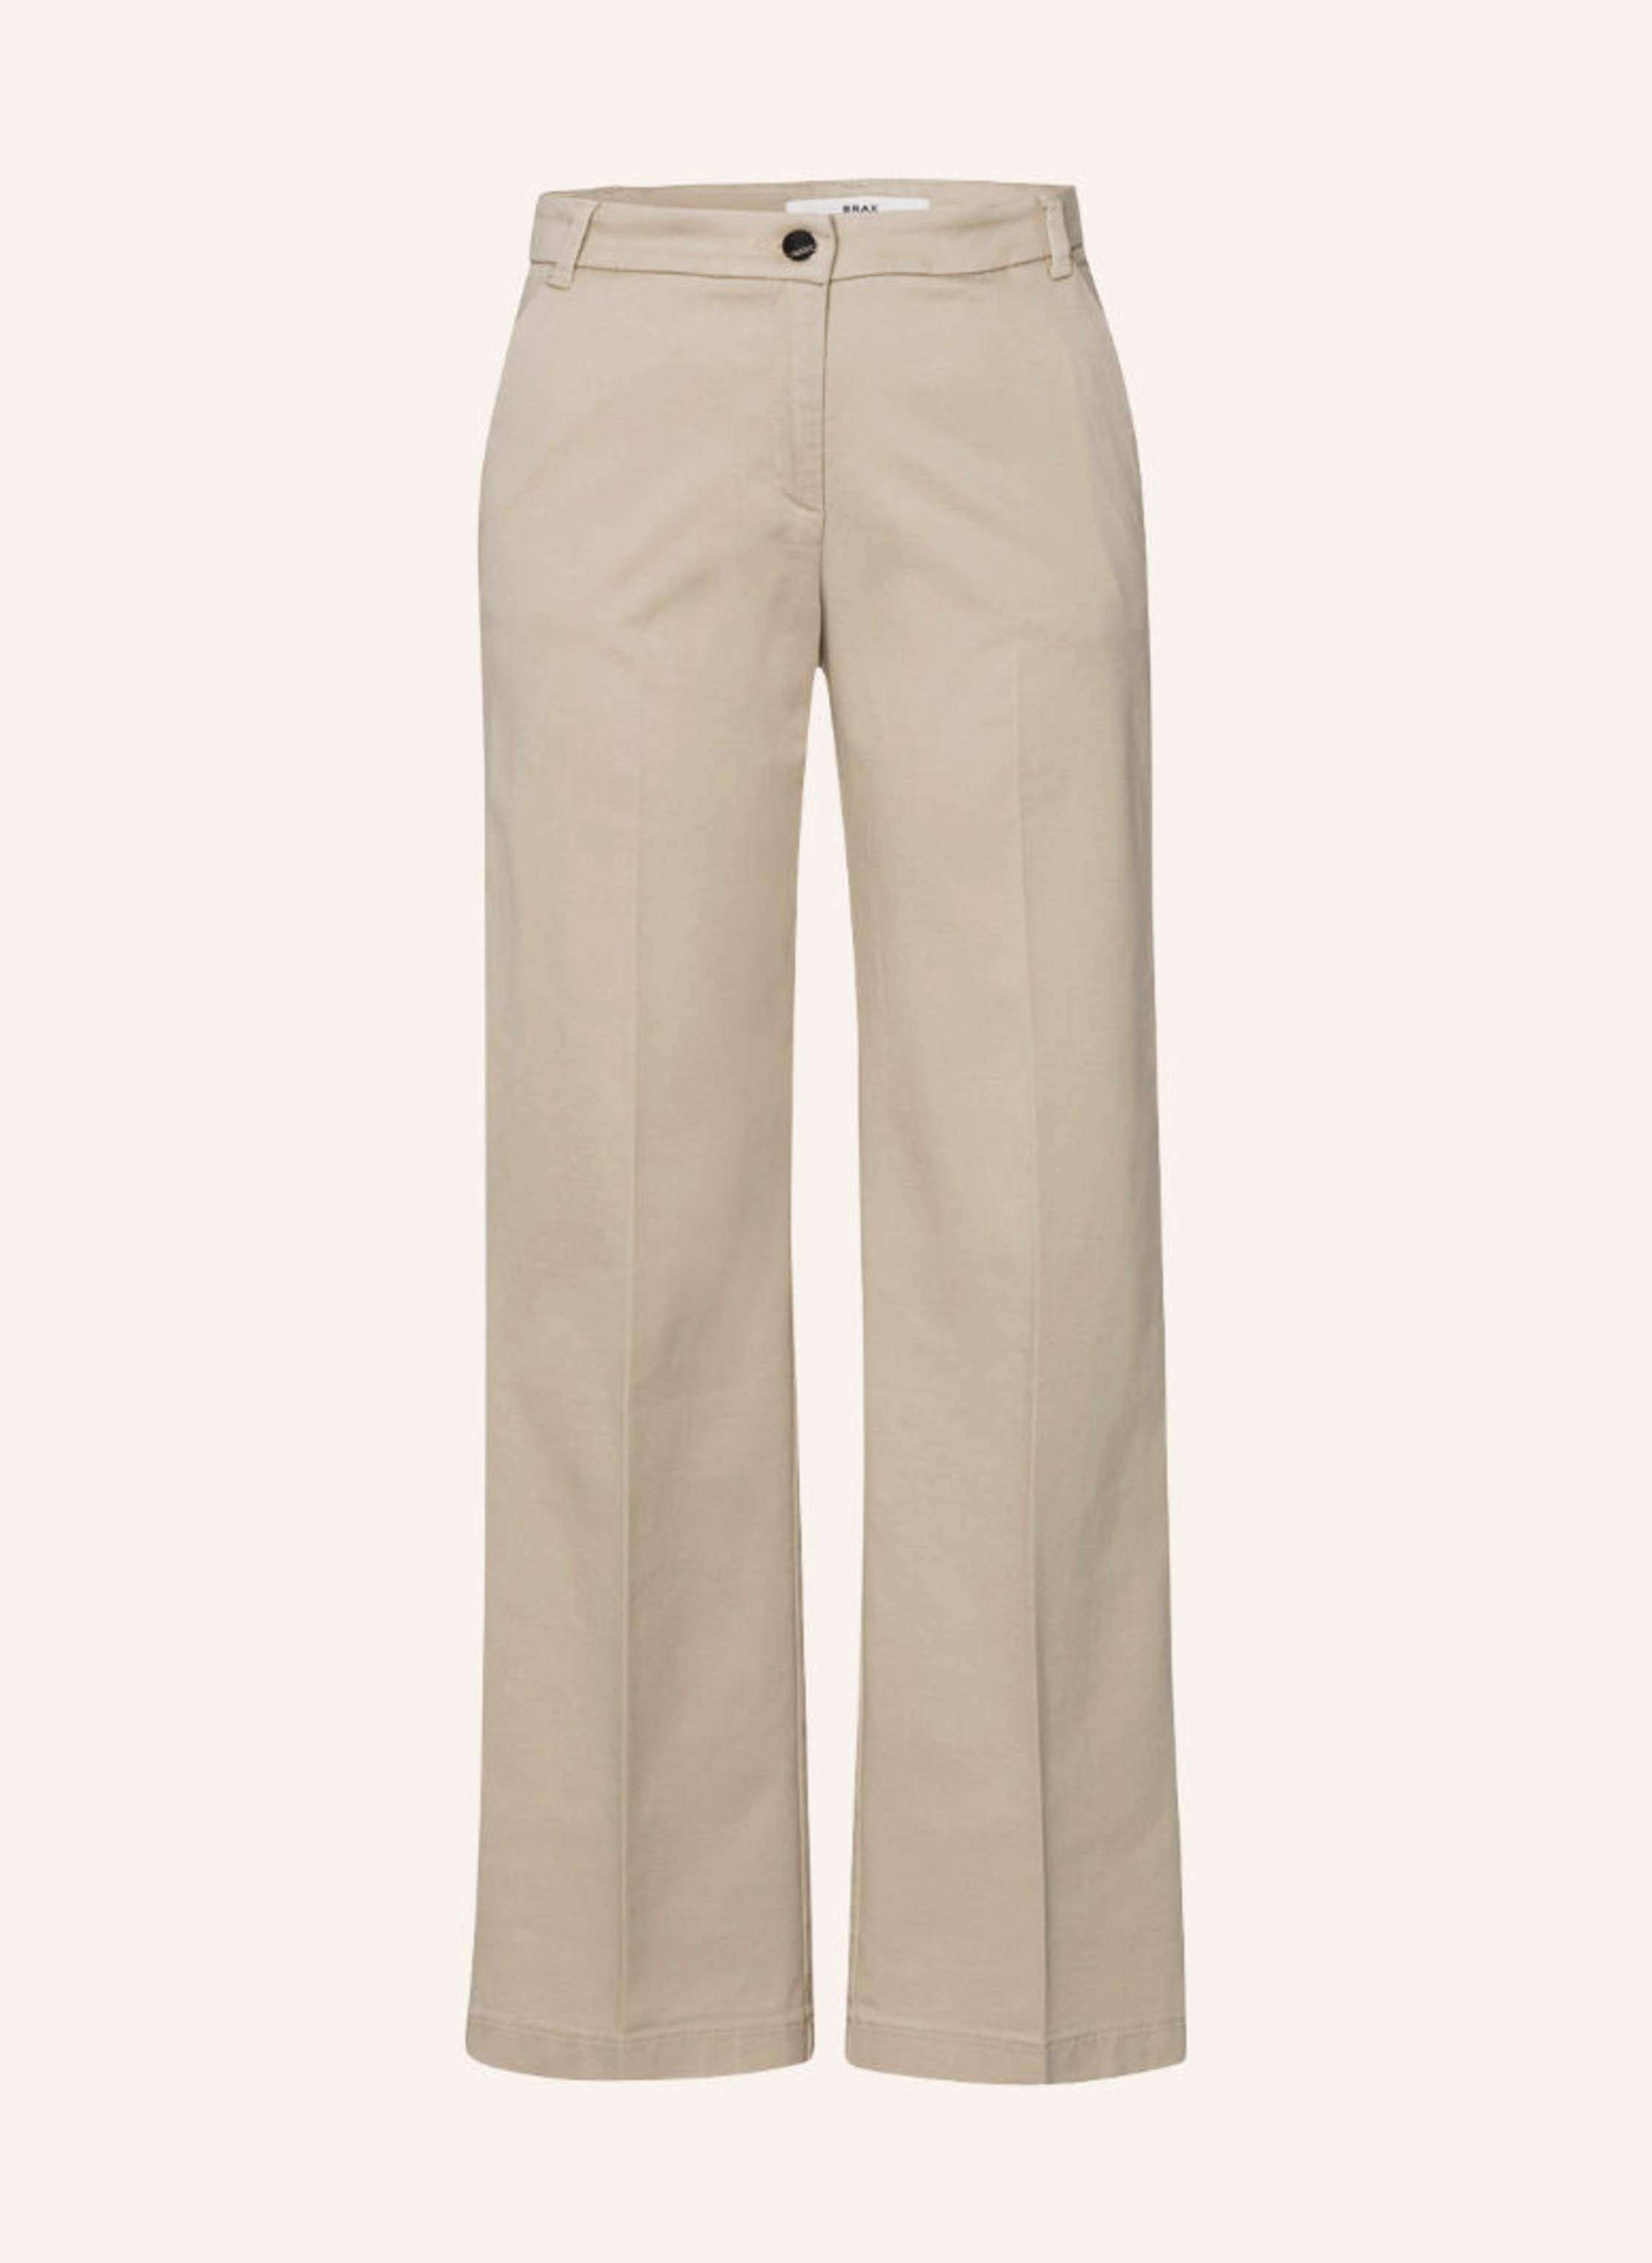 MAINE in beige STYLE BRAX Palazzohose